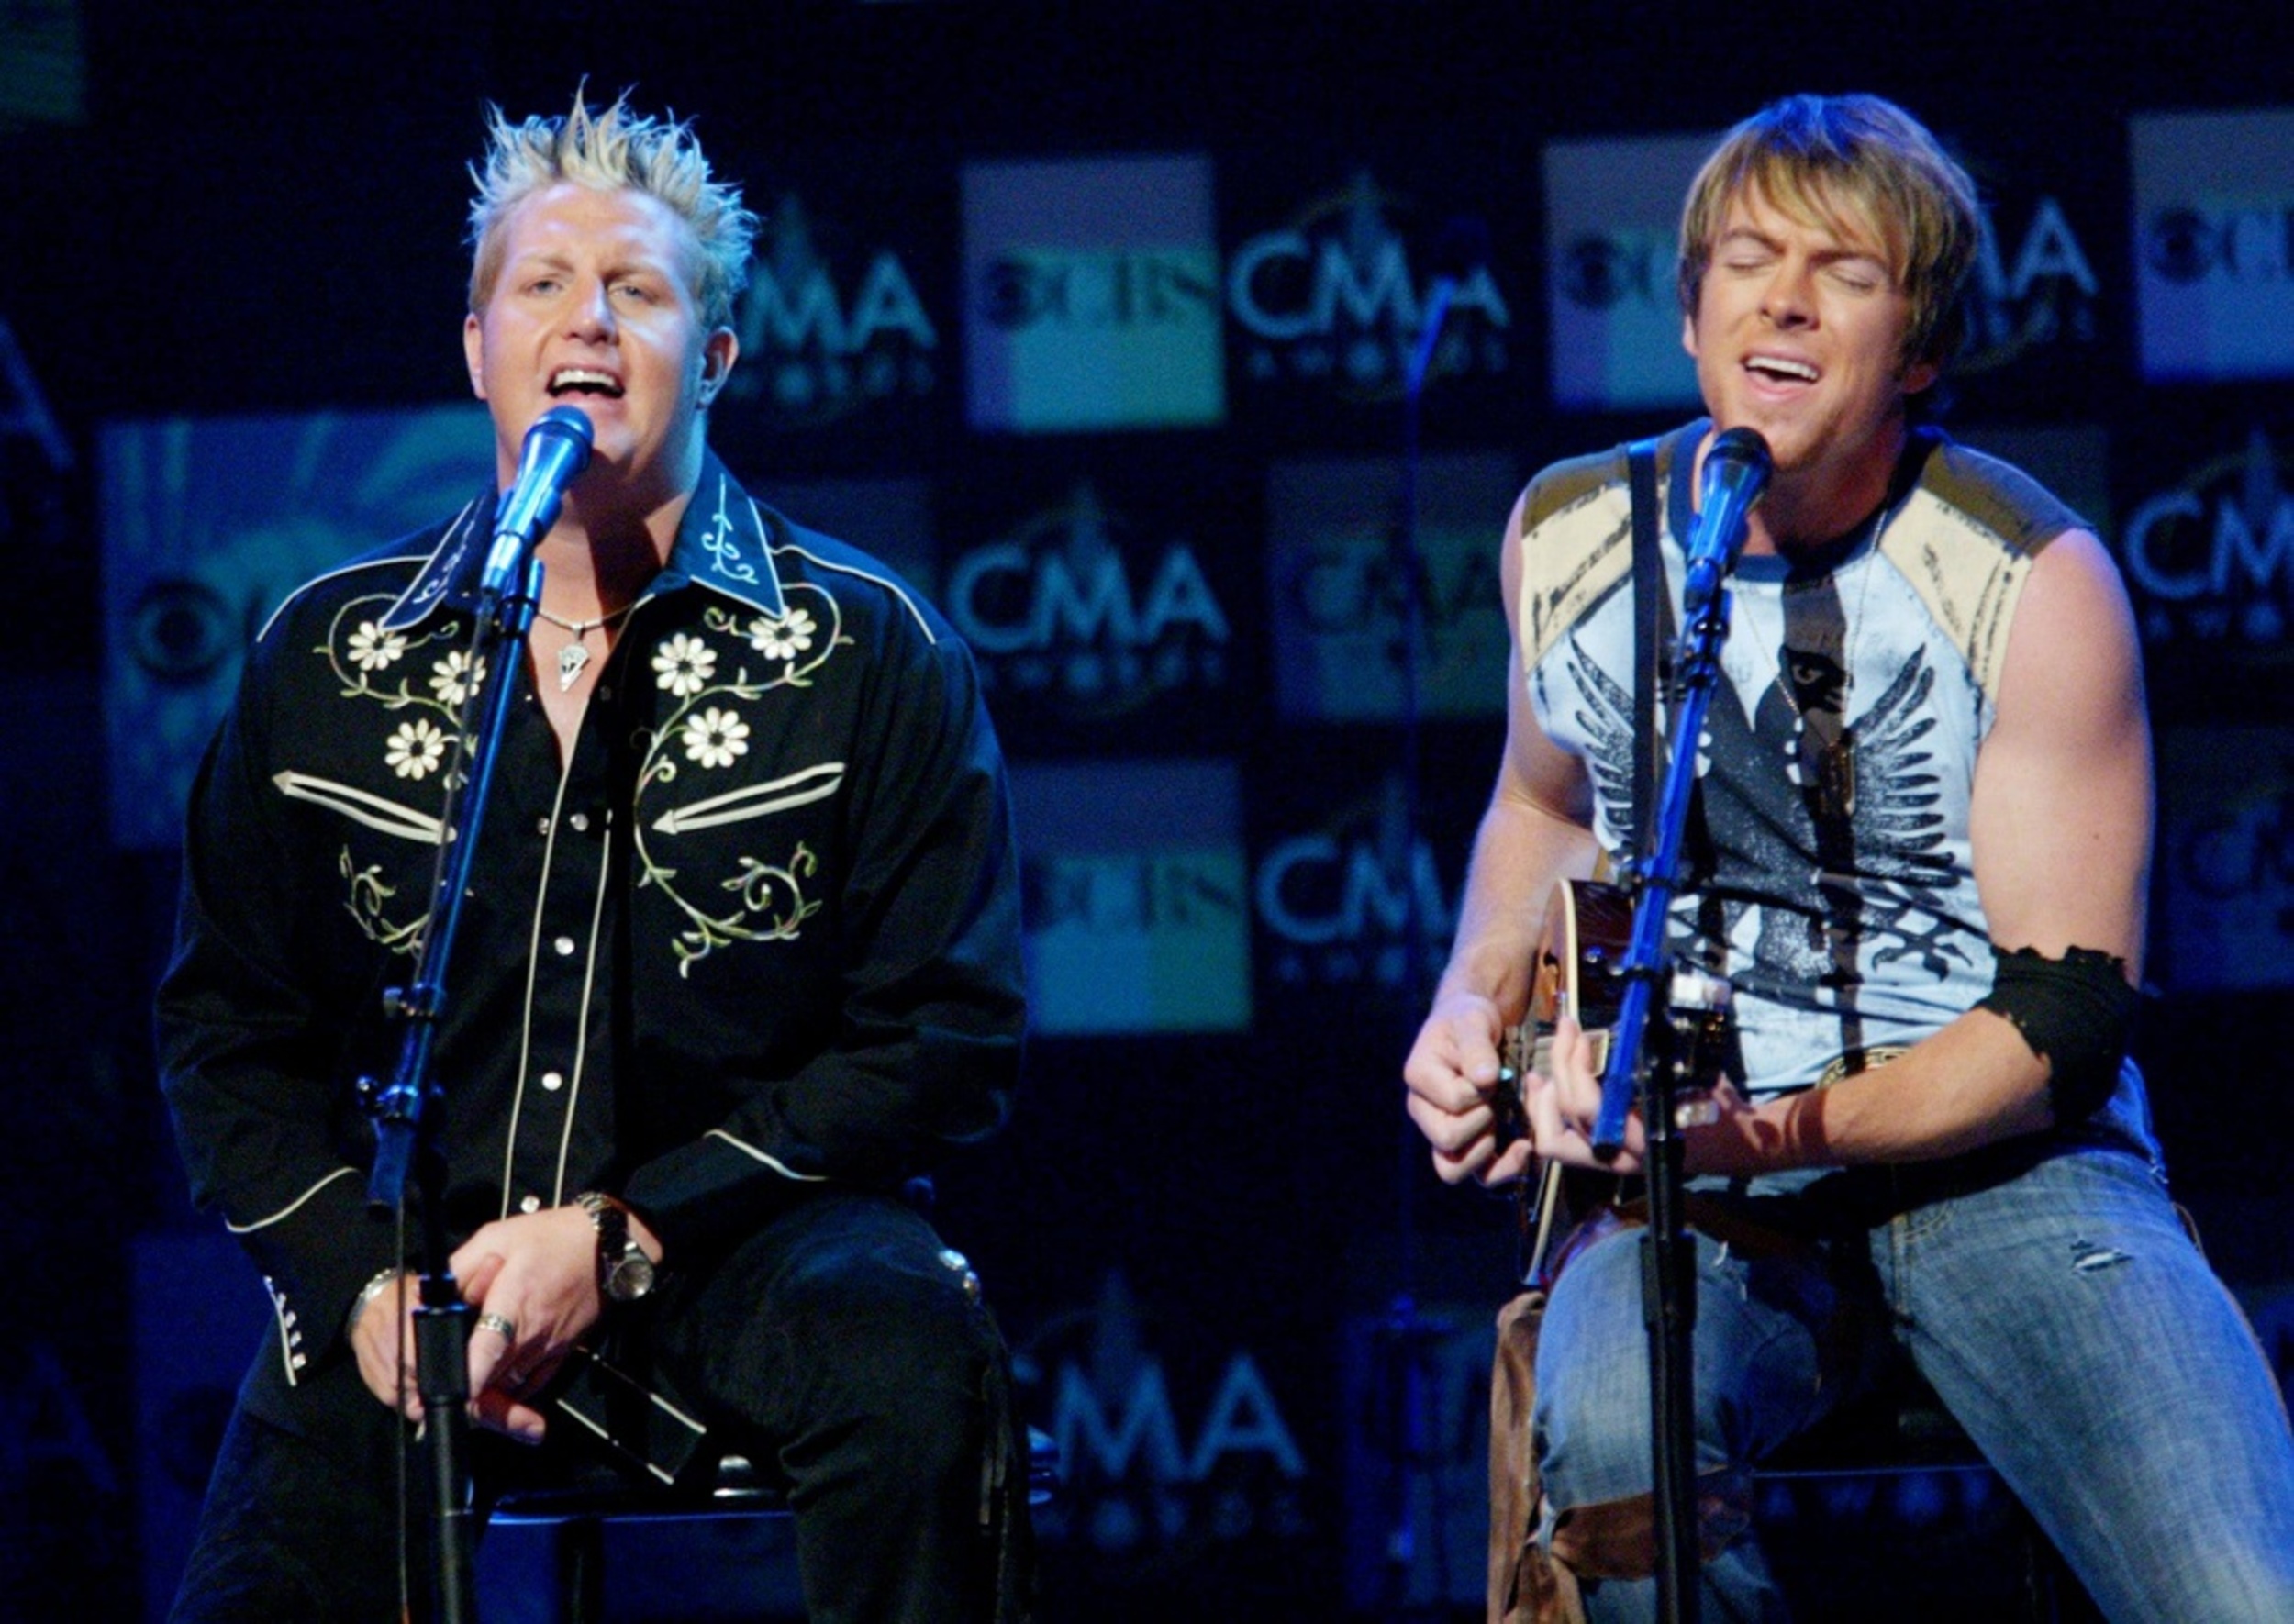 <p>We're not sure what Rascal Flatts did to this song to make it so groovy, but it's one tune that's so loved we have to include it on this list.</p><p><a href='https://www.msn.com/en-us/community/channel/vid-cj9pqbr0vn9in2b6ddcd8sfgpfq6x6utp44fssrv6mc2gtybw0us'>Follow us on MSN to see more of our exclusive entertainment content.</a></p>